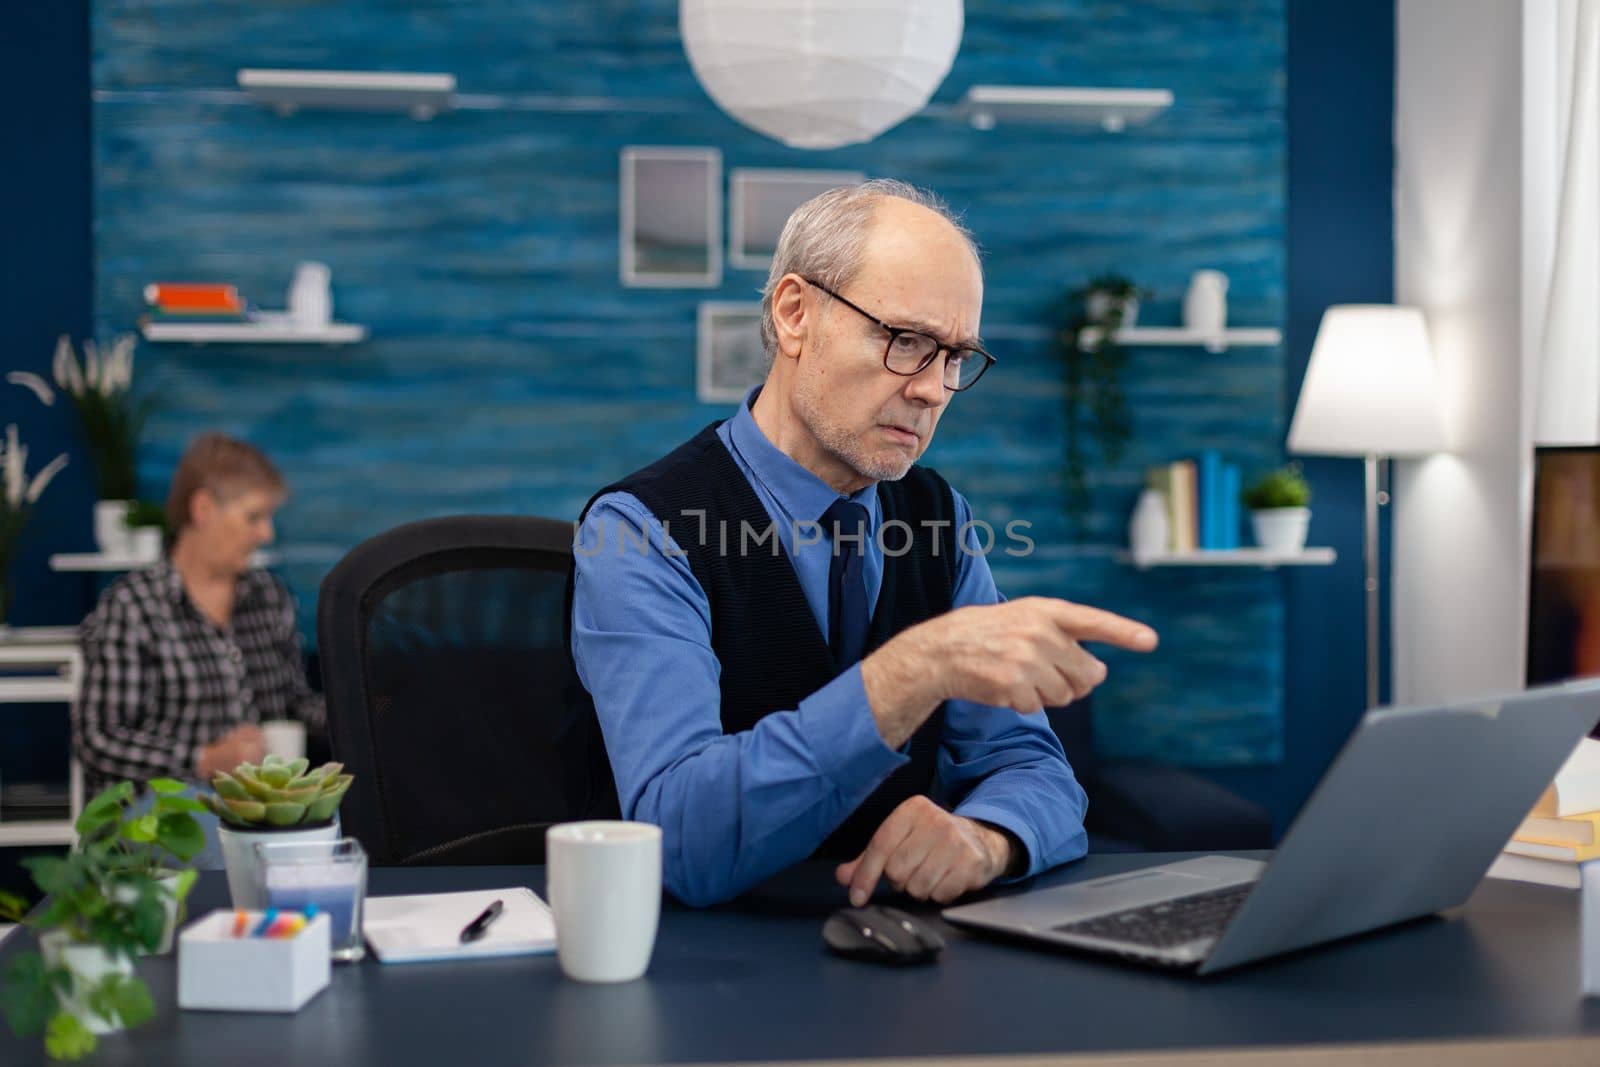 Thoughtfull senior businessman pointing at laptop whille working from home. Elderly man entrepreneur in home workplace using portable computer sitting at desk while wife is holding tv remote.